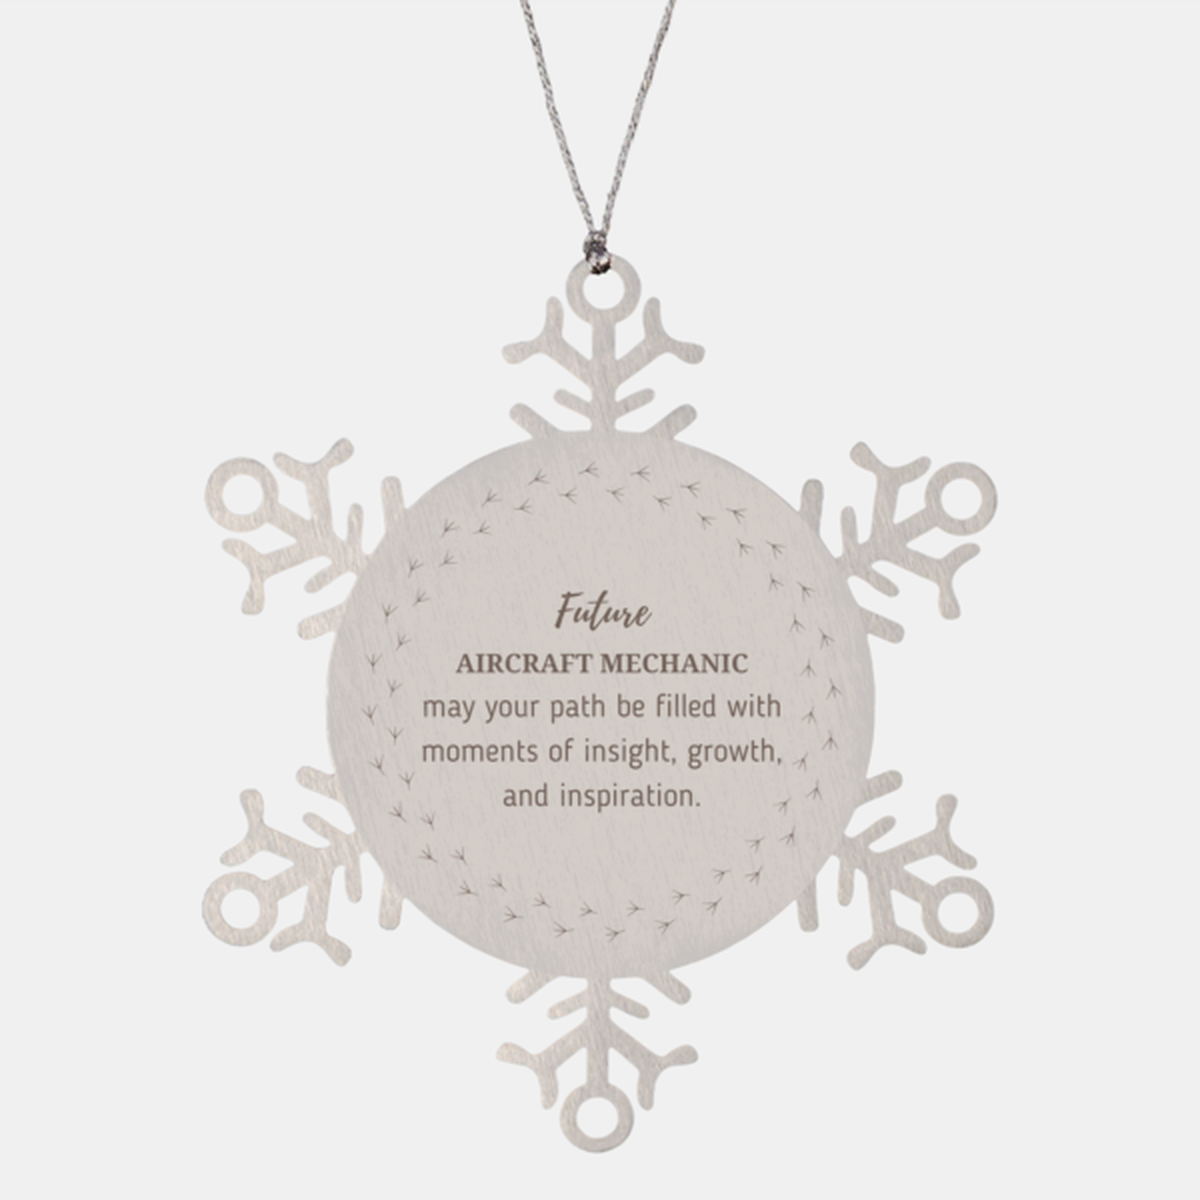 Future Aircraft Mechanic Gifts, May your path be filled with moments of insight, Graduation Gifts for New Aircraft Mechanic, Christmas Unique Snowflake Ornament For Men, Women, Friends